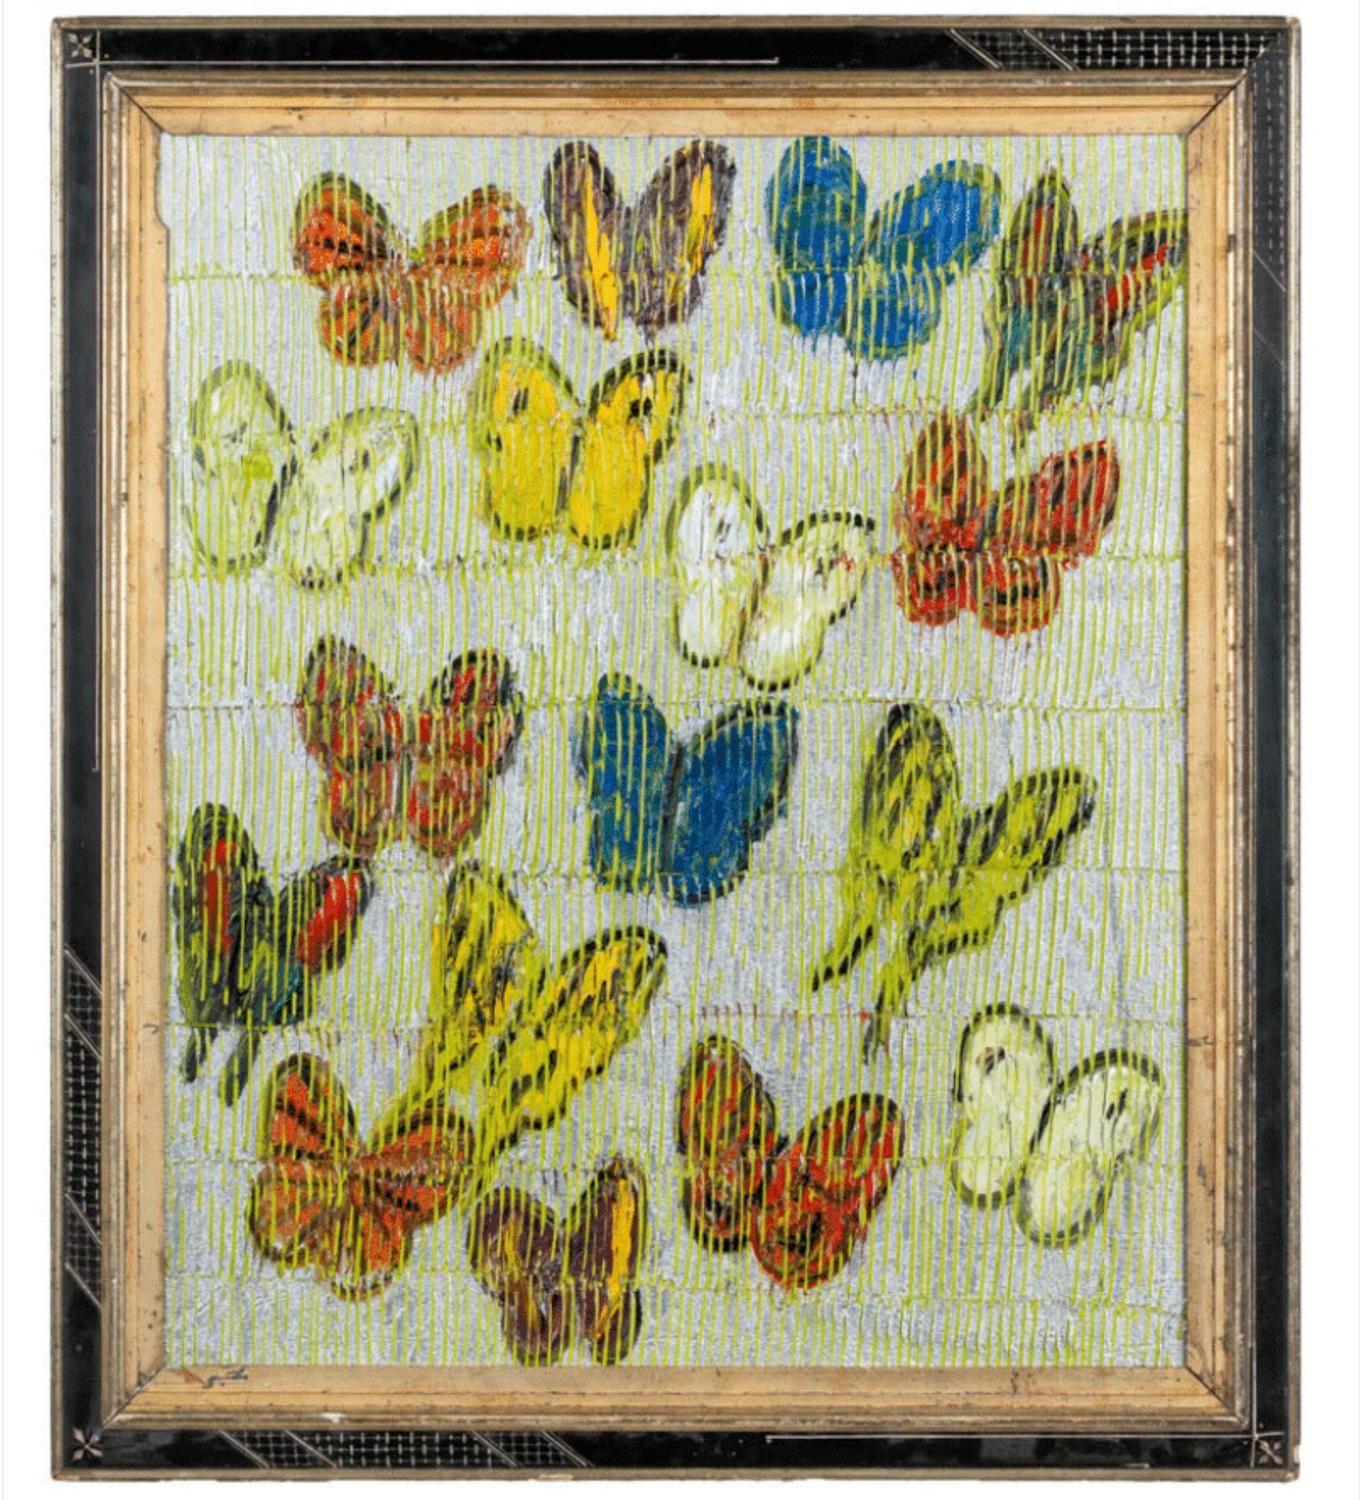 Renowned artist Hunt Slonem's "East Lake New" is a 29.5 x24.5 metallic silver scored oil painting on wood board of contemporary abstract colorful butterflies in oranges, blues, yellows, and whites. 

*Painting is framed - Please note that not all